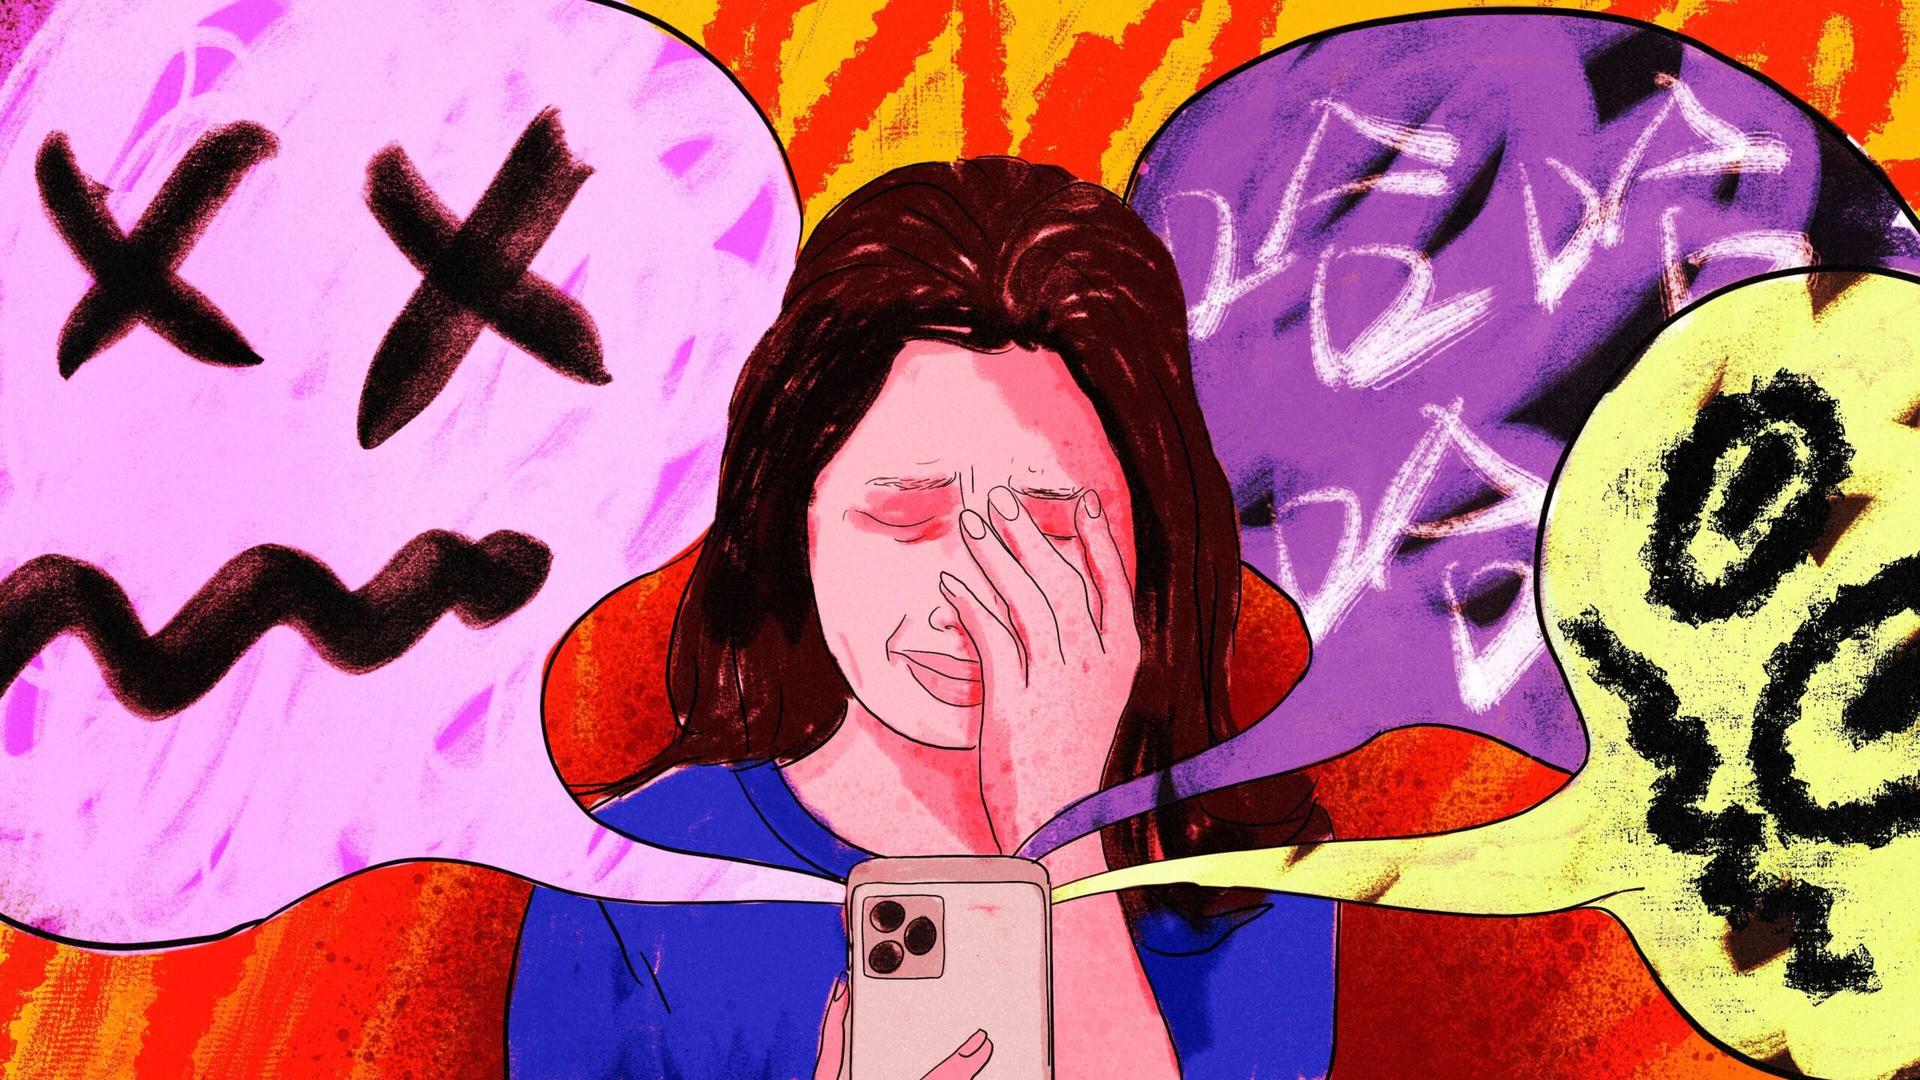 An illustration by Alex Santafe depicting a girl crying while being bullyied over the internet